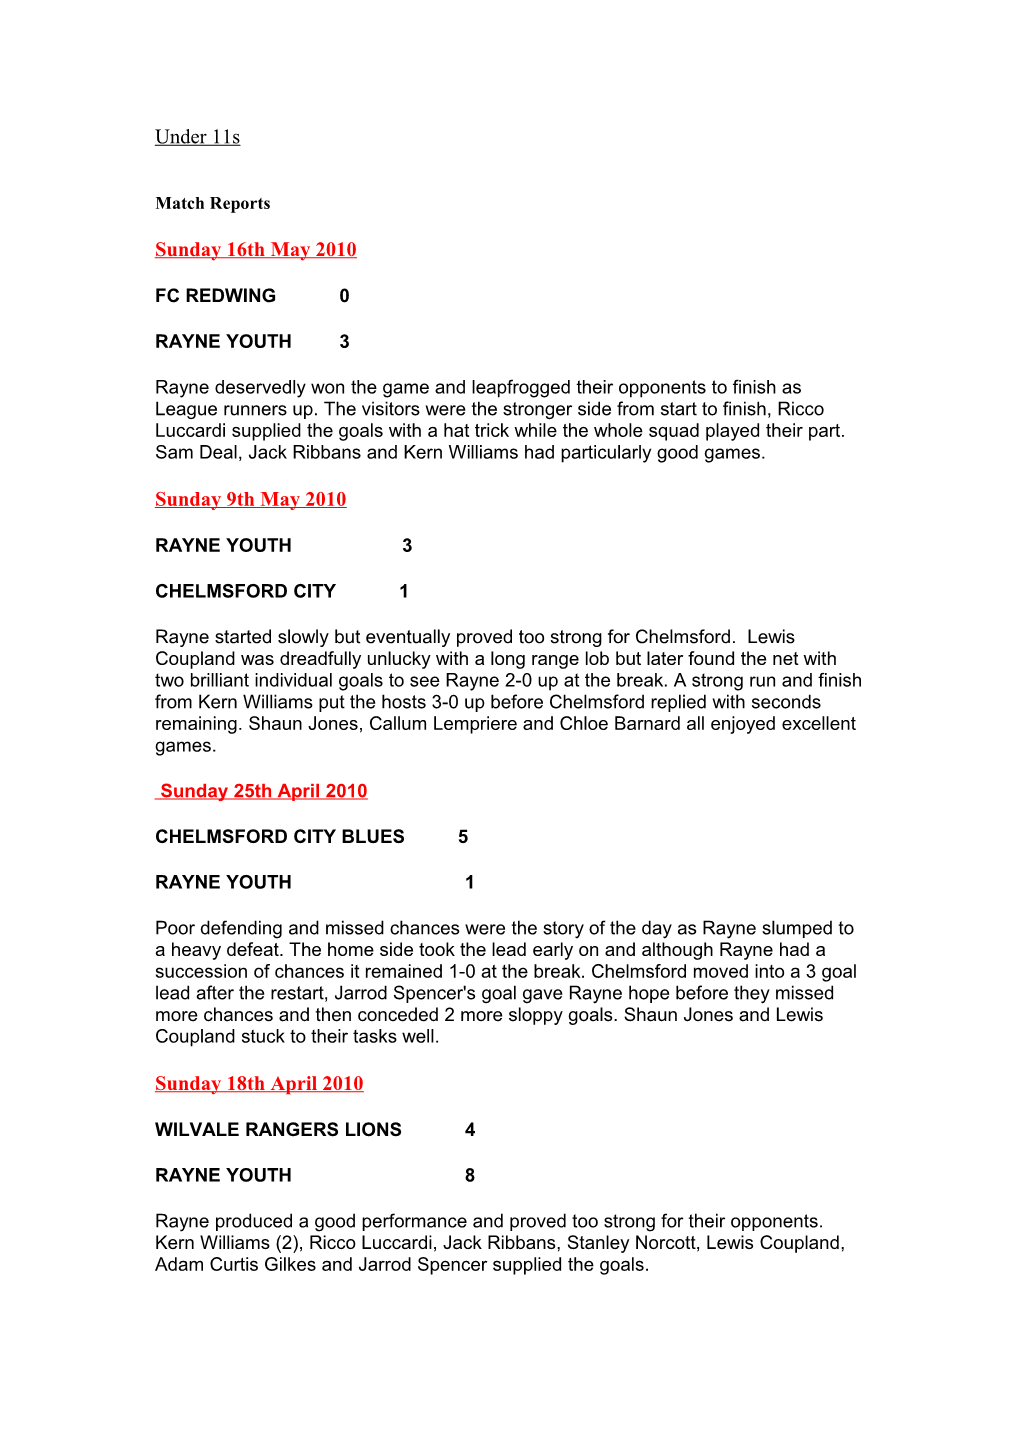 Under 11S Match Reports